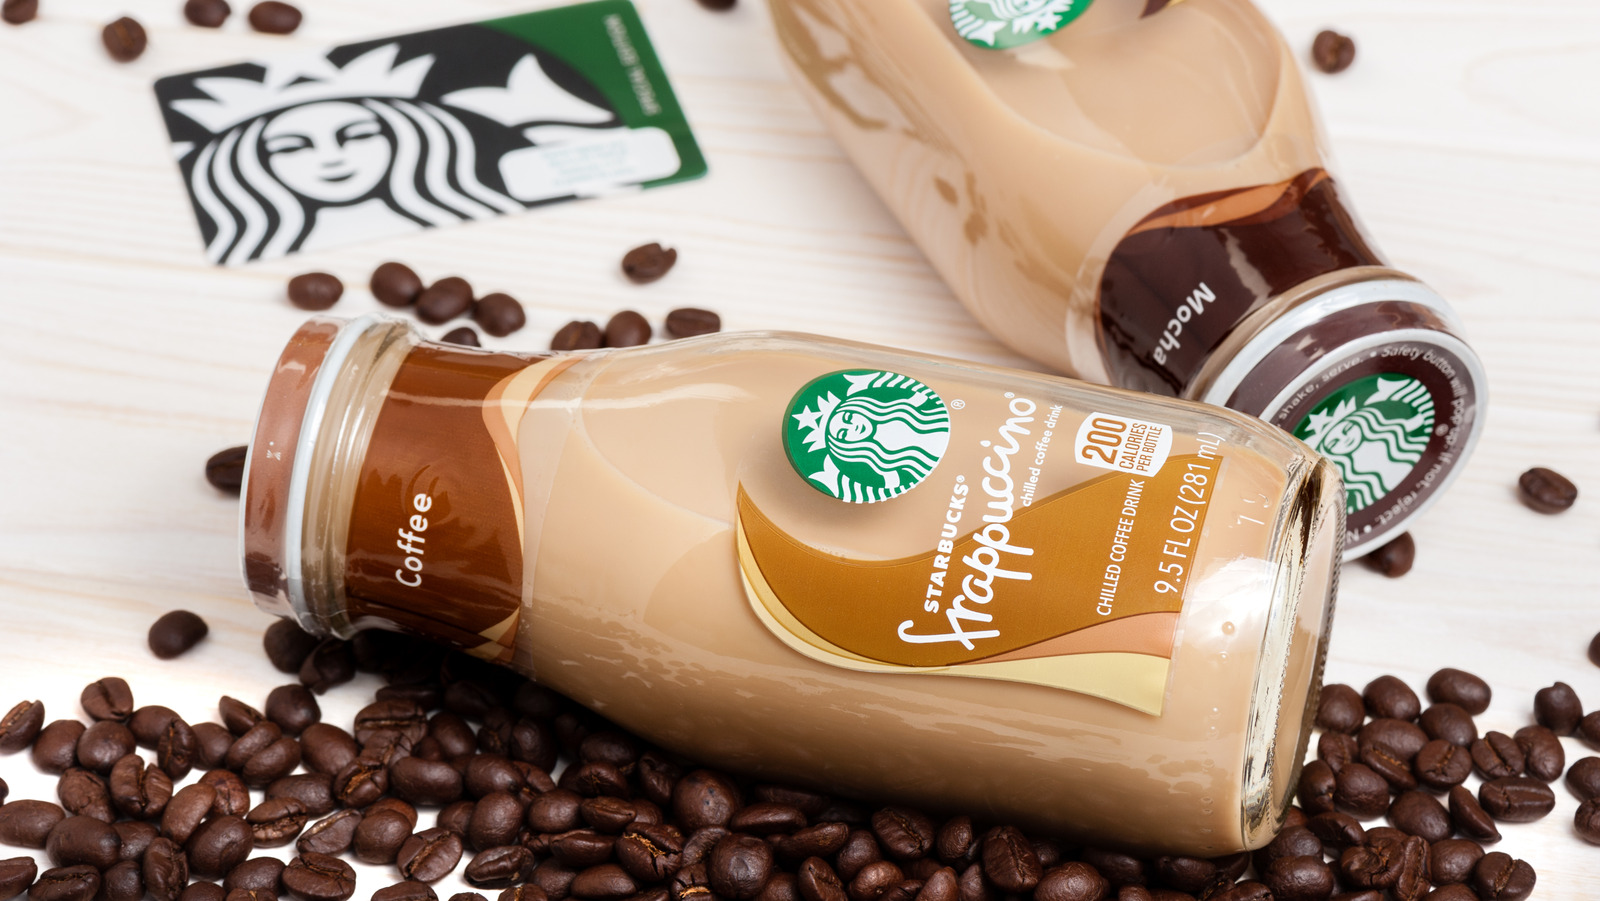 Freeze Starbucks Frappuccino Bottles To Enjoy Them The Right Way